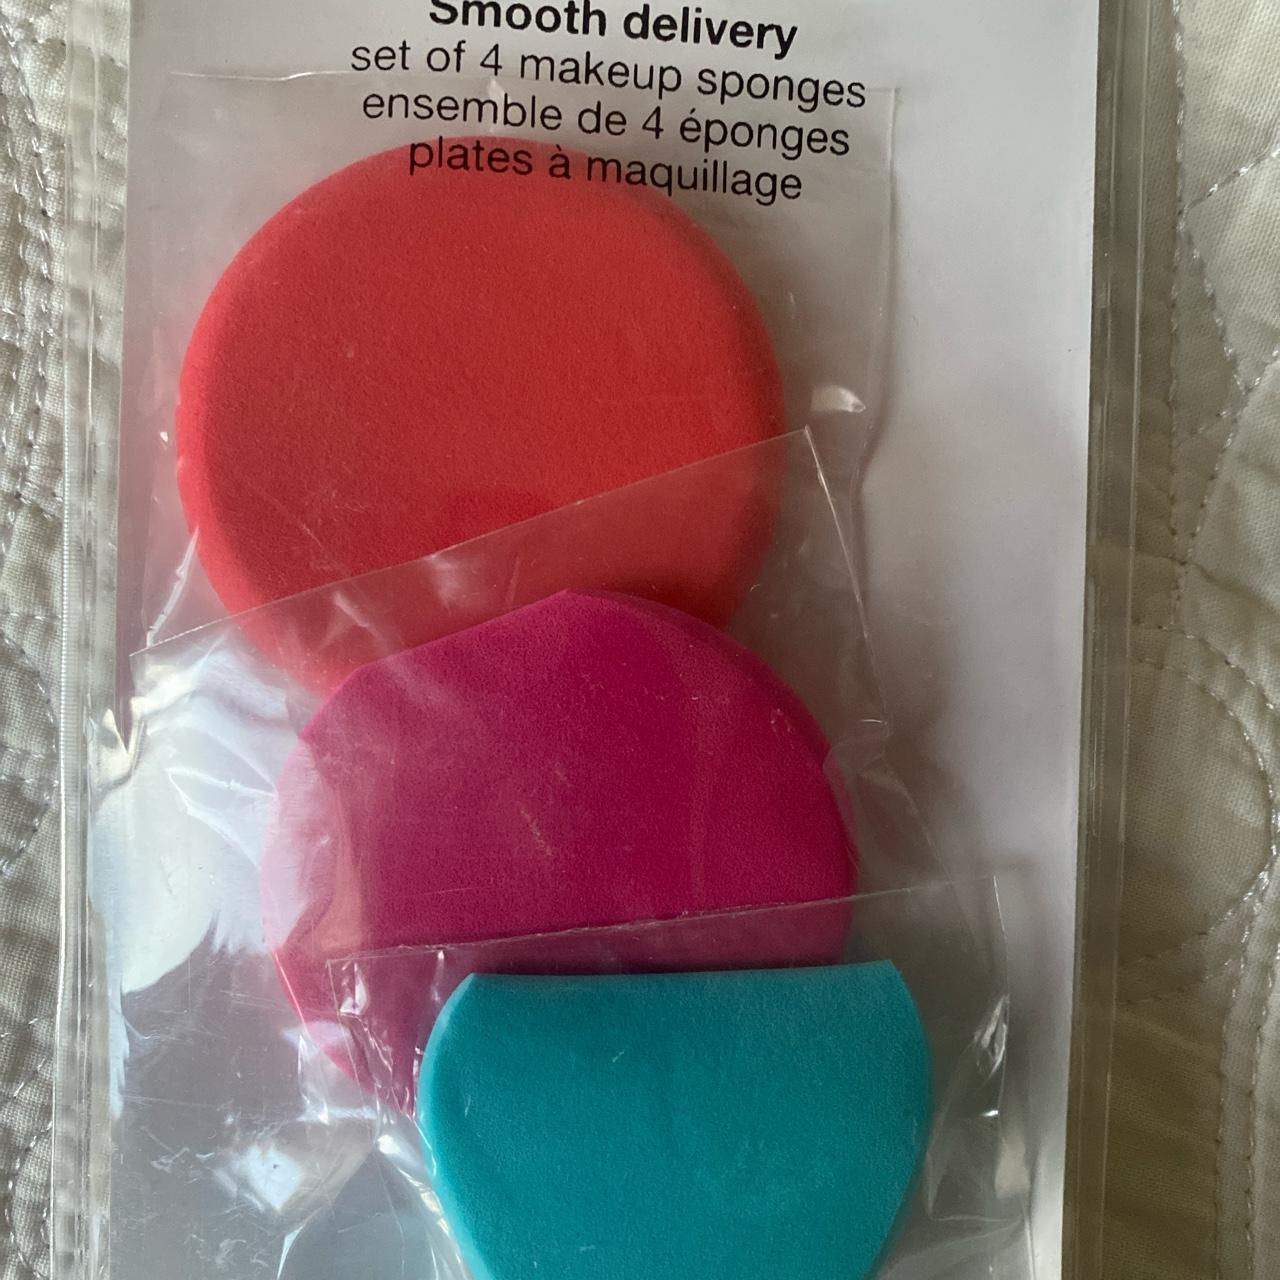 Sephora Women's Pink and Blue Accessory (2)